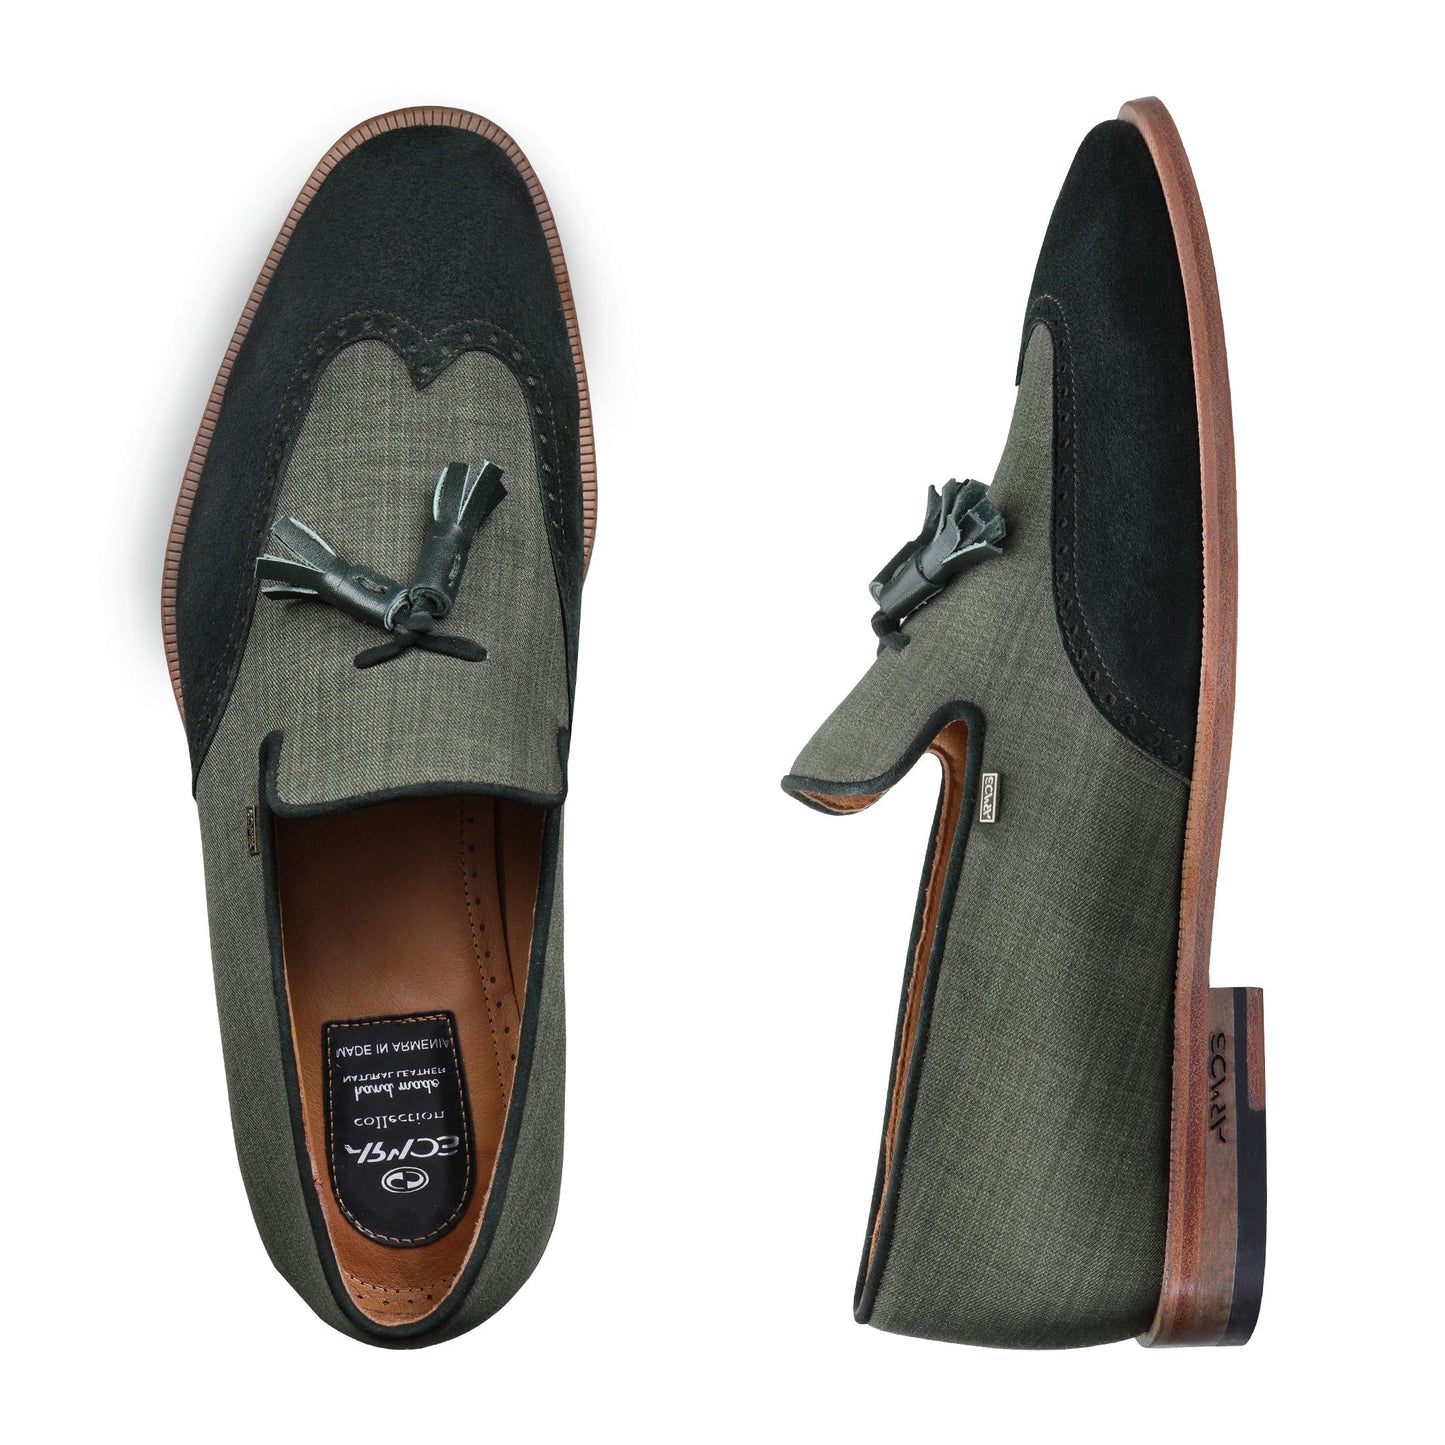 Loafers in shades of green